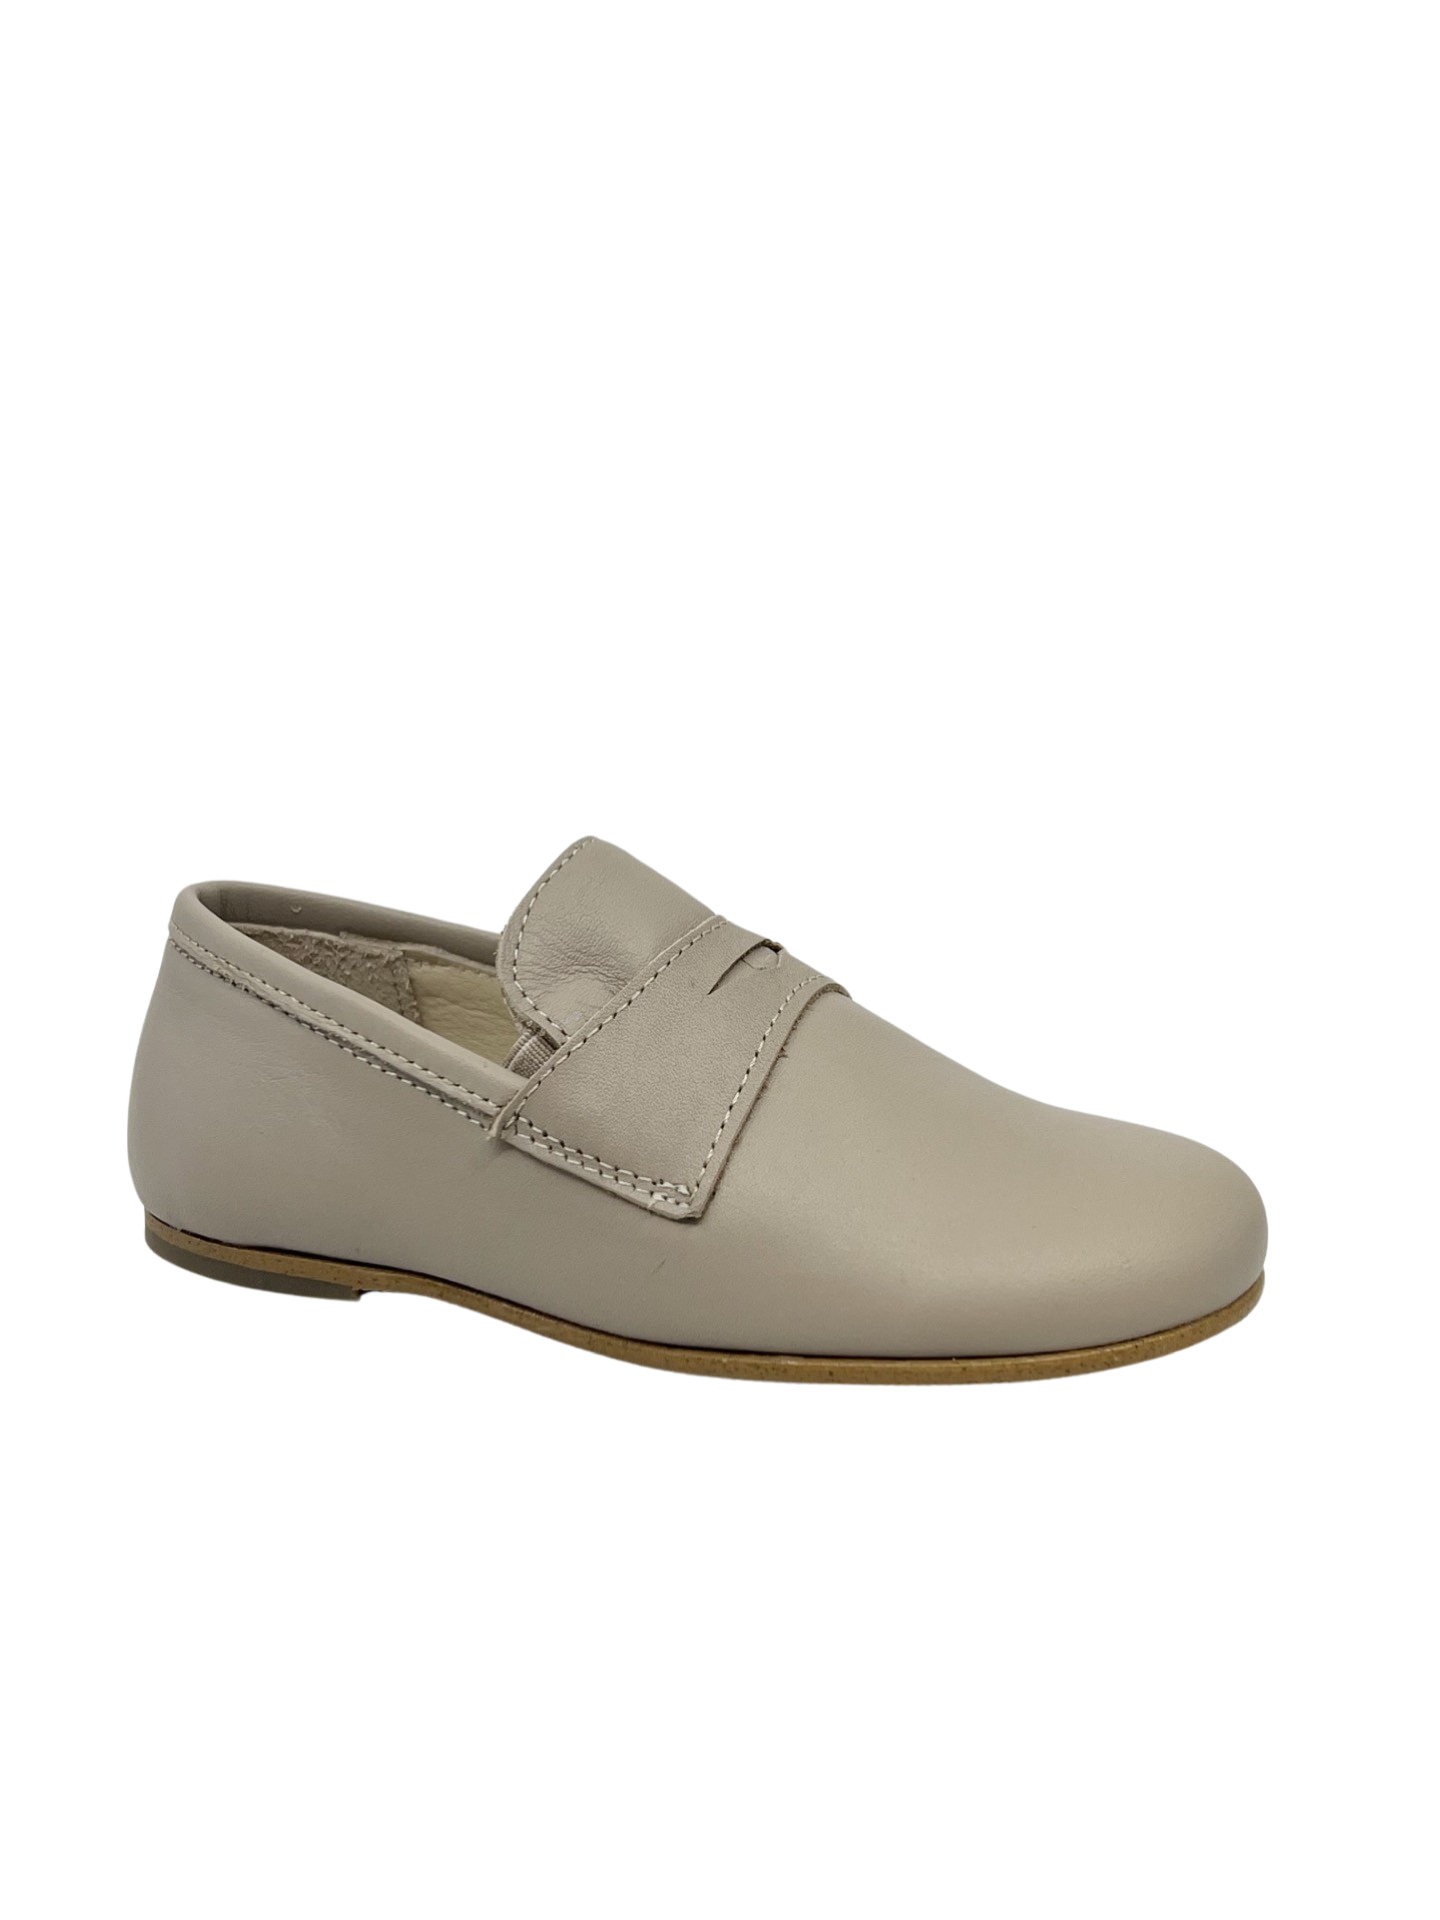 Luccini Beige Penny Loafer